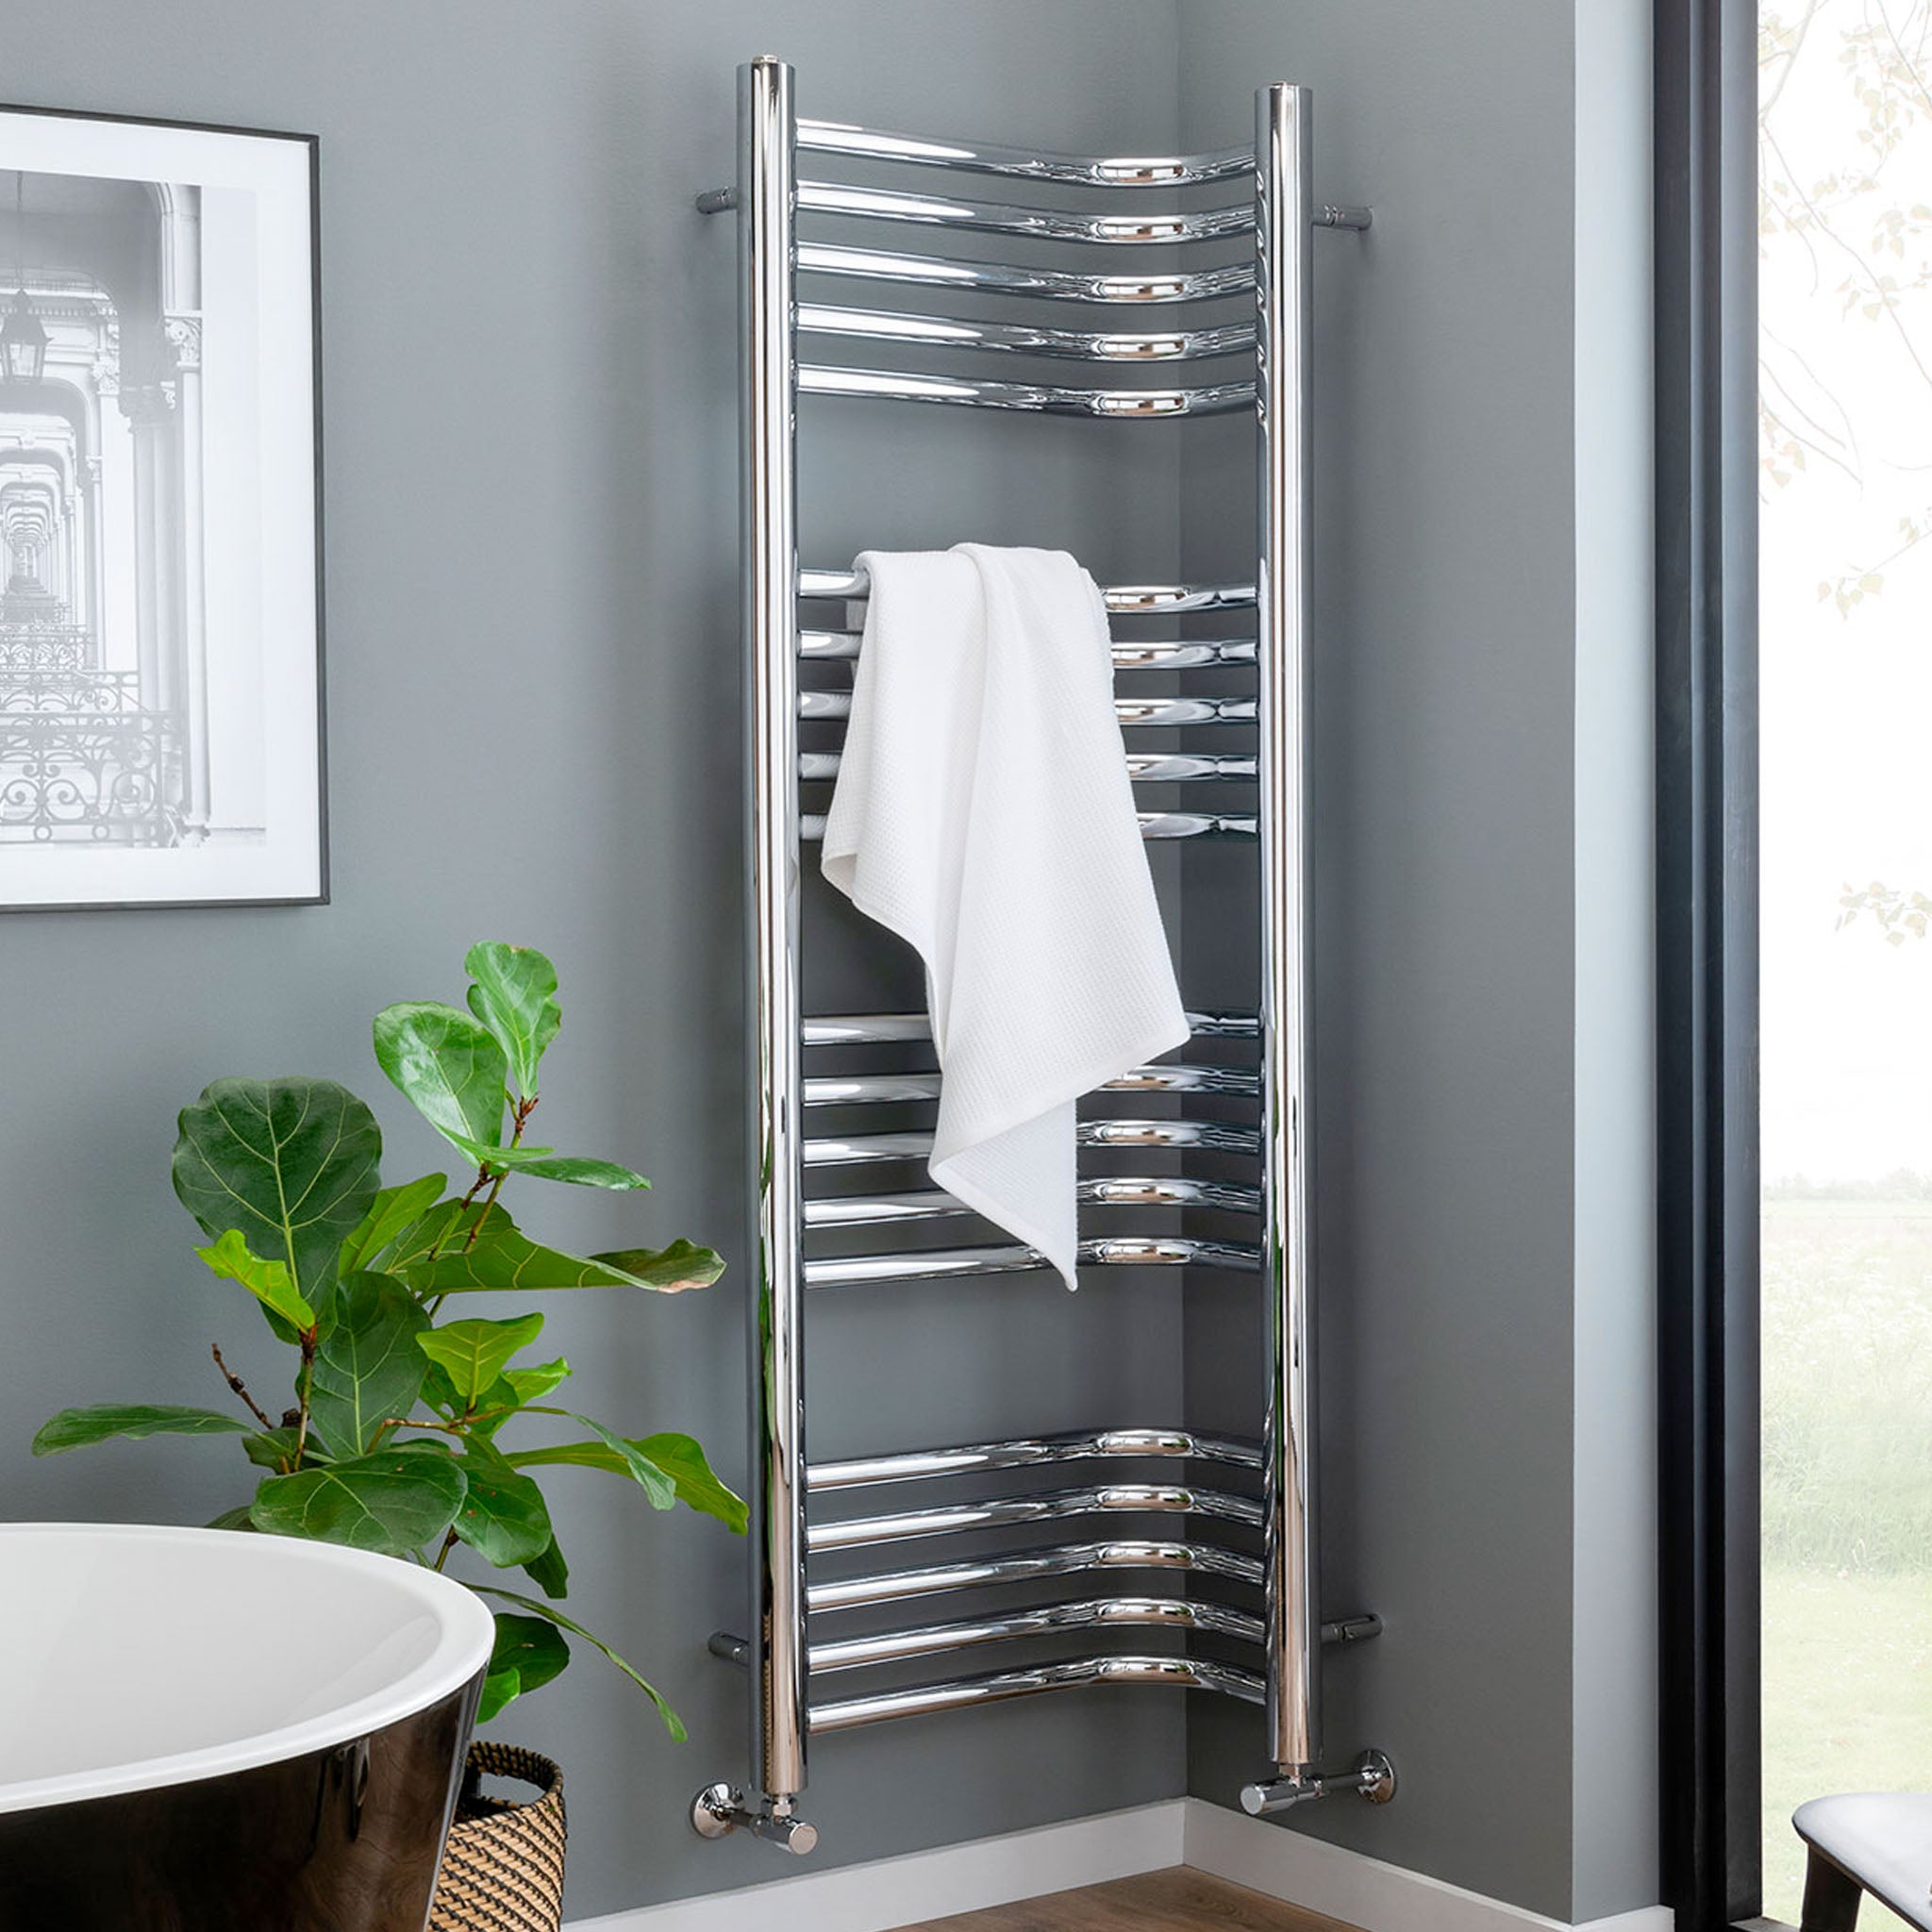 Vogue Inttra Wall Mounted Heated Towel Rail